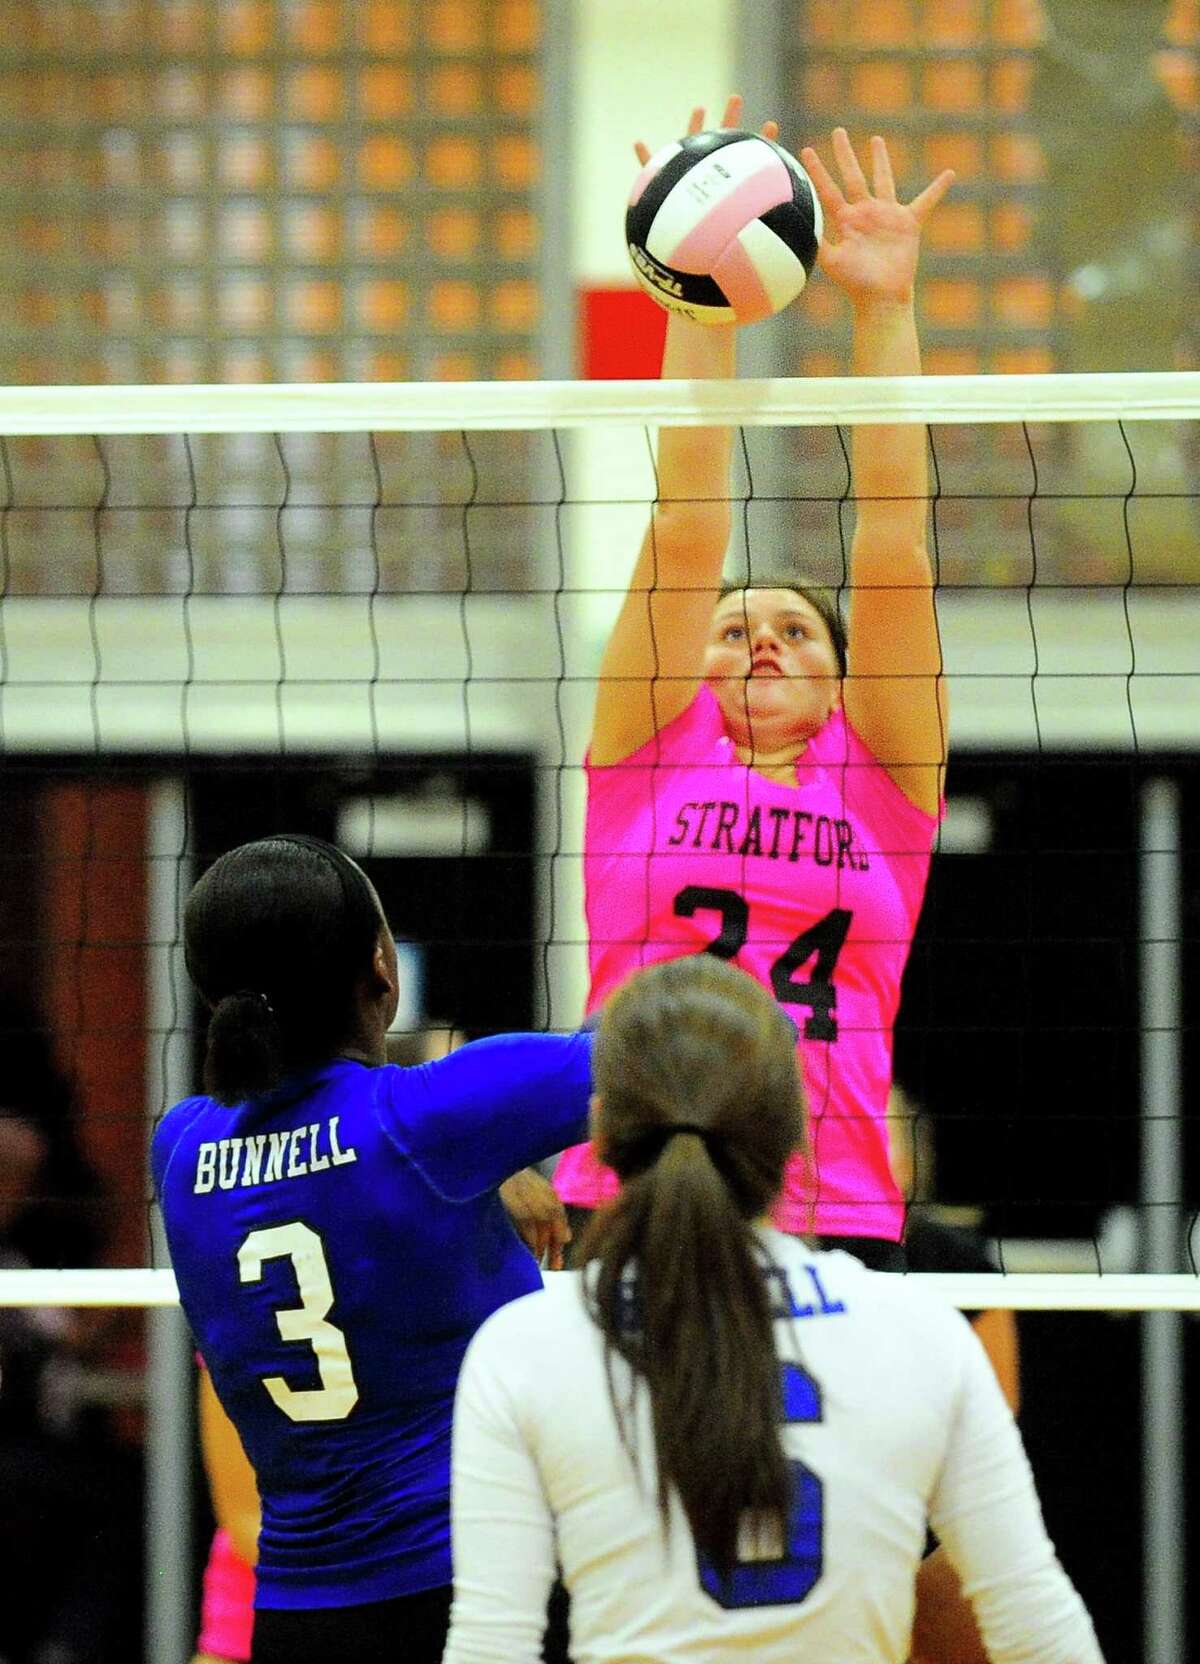 Stratford's Samantha Carbone blocks a spike by Bunnell's Kayla Sokunle during girls volleyball action in Stratford, Conn. on Wednesday, Oct. 4, 2017.